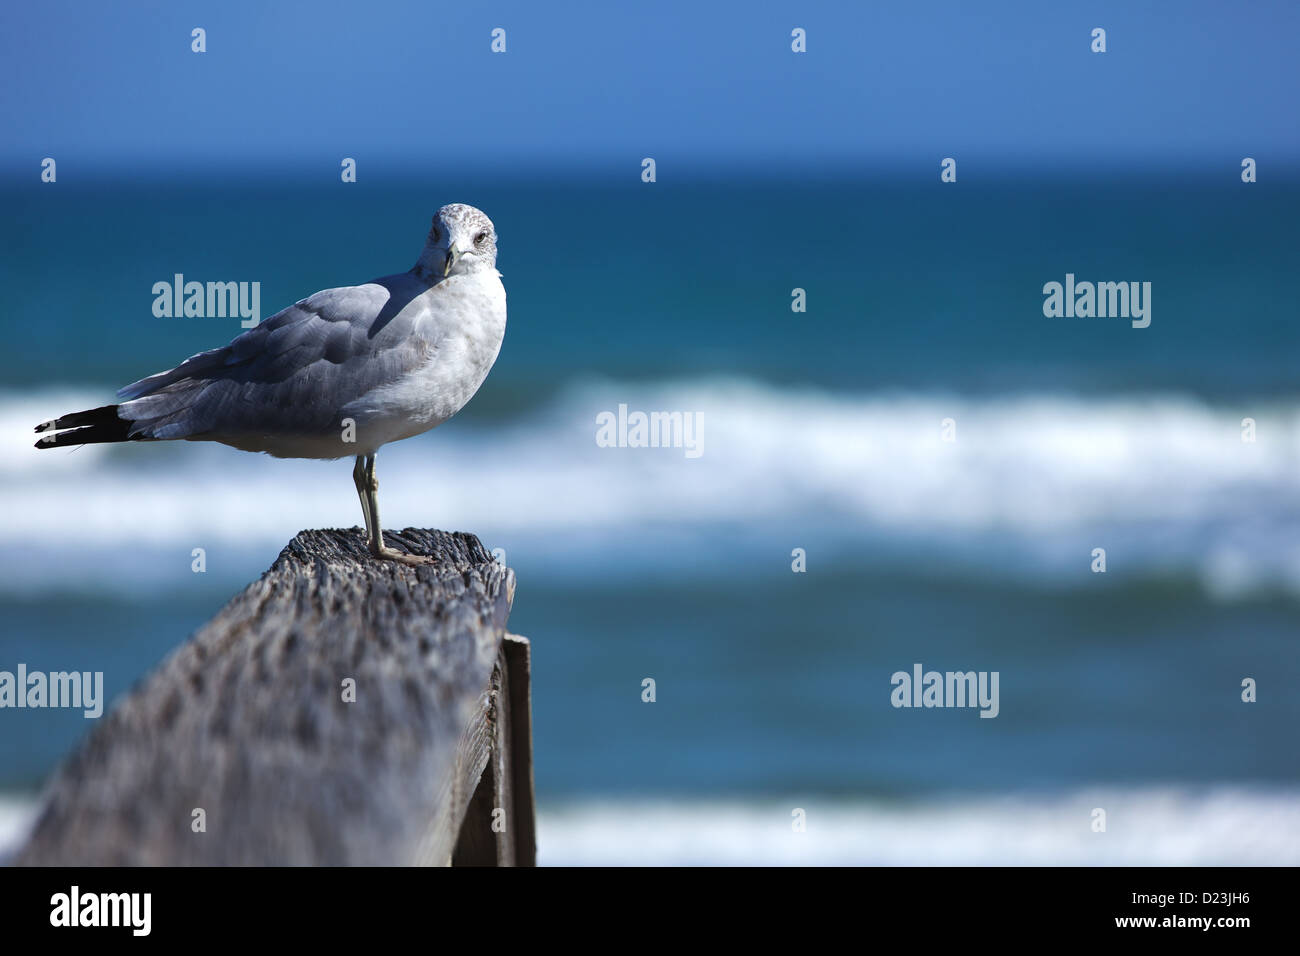 A seagull on a dock. Stock Photo